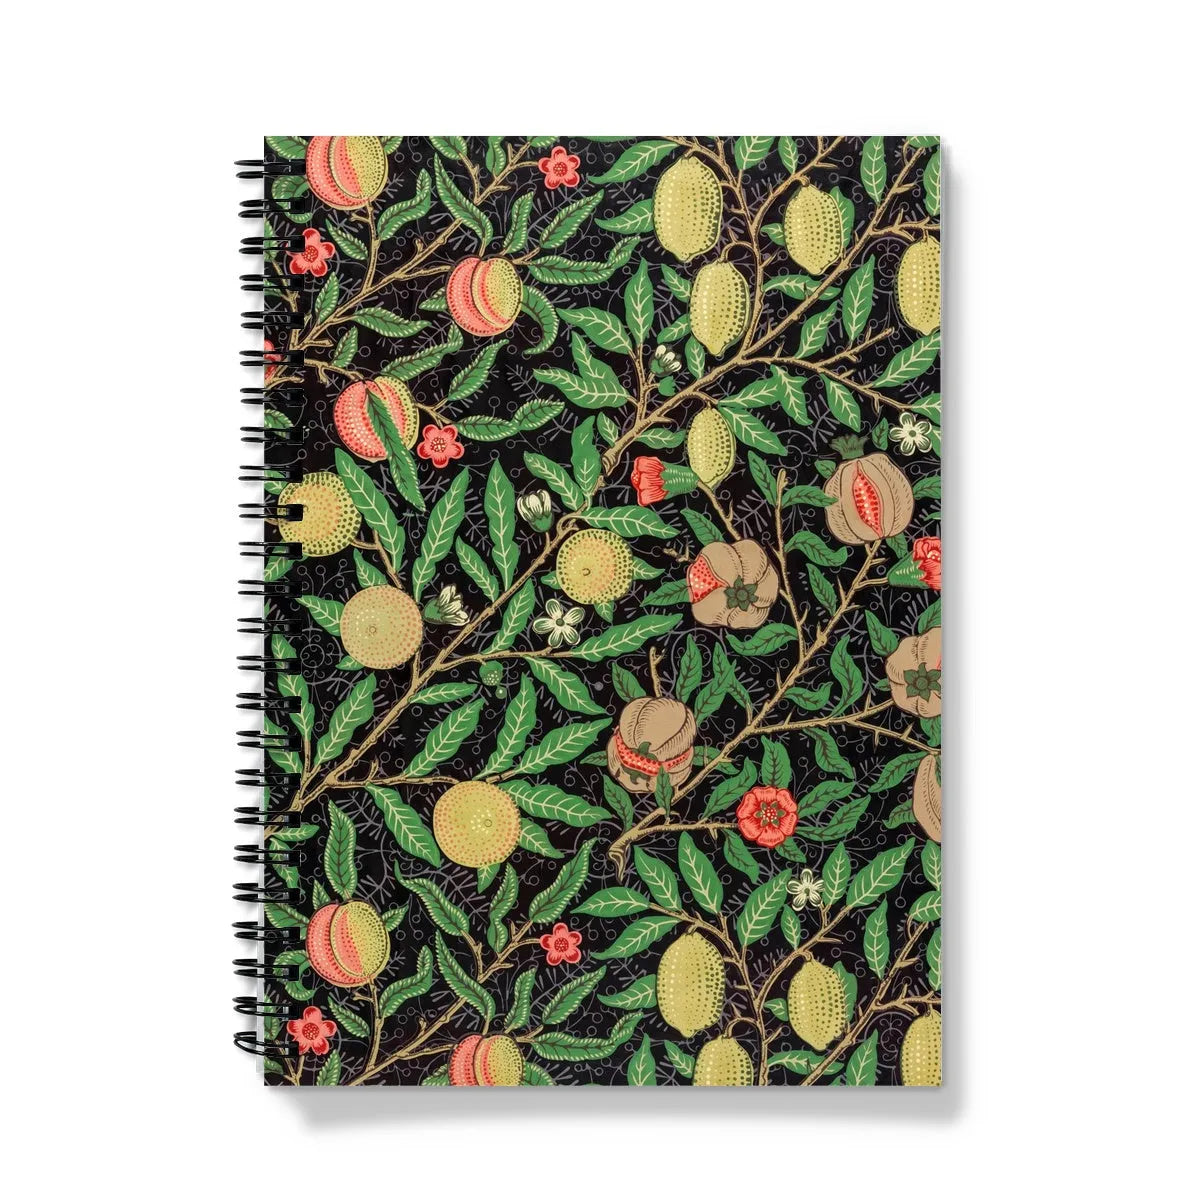 Four Fruits Too - William Morris Notebook - A5 - Graph Paper - Notebooks & Notepads - Aesthetic Art